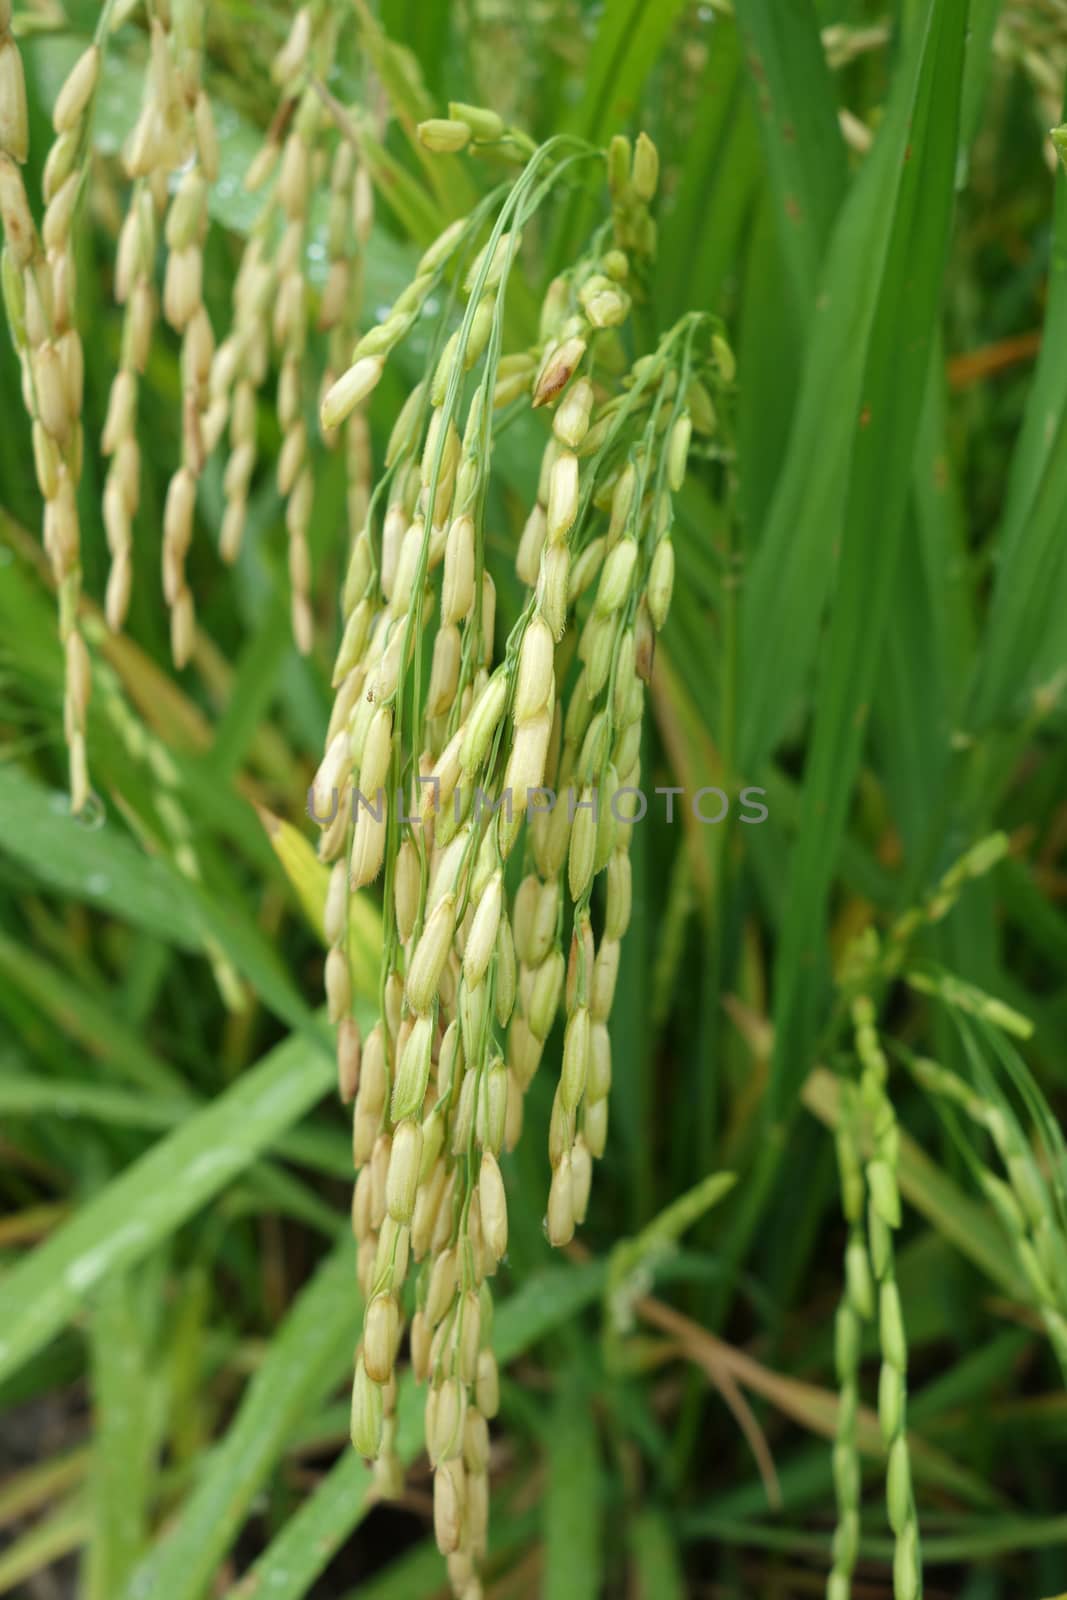 Ripe rice grains in Asia before harvest by tang90246